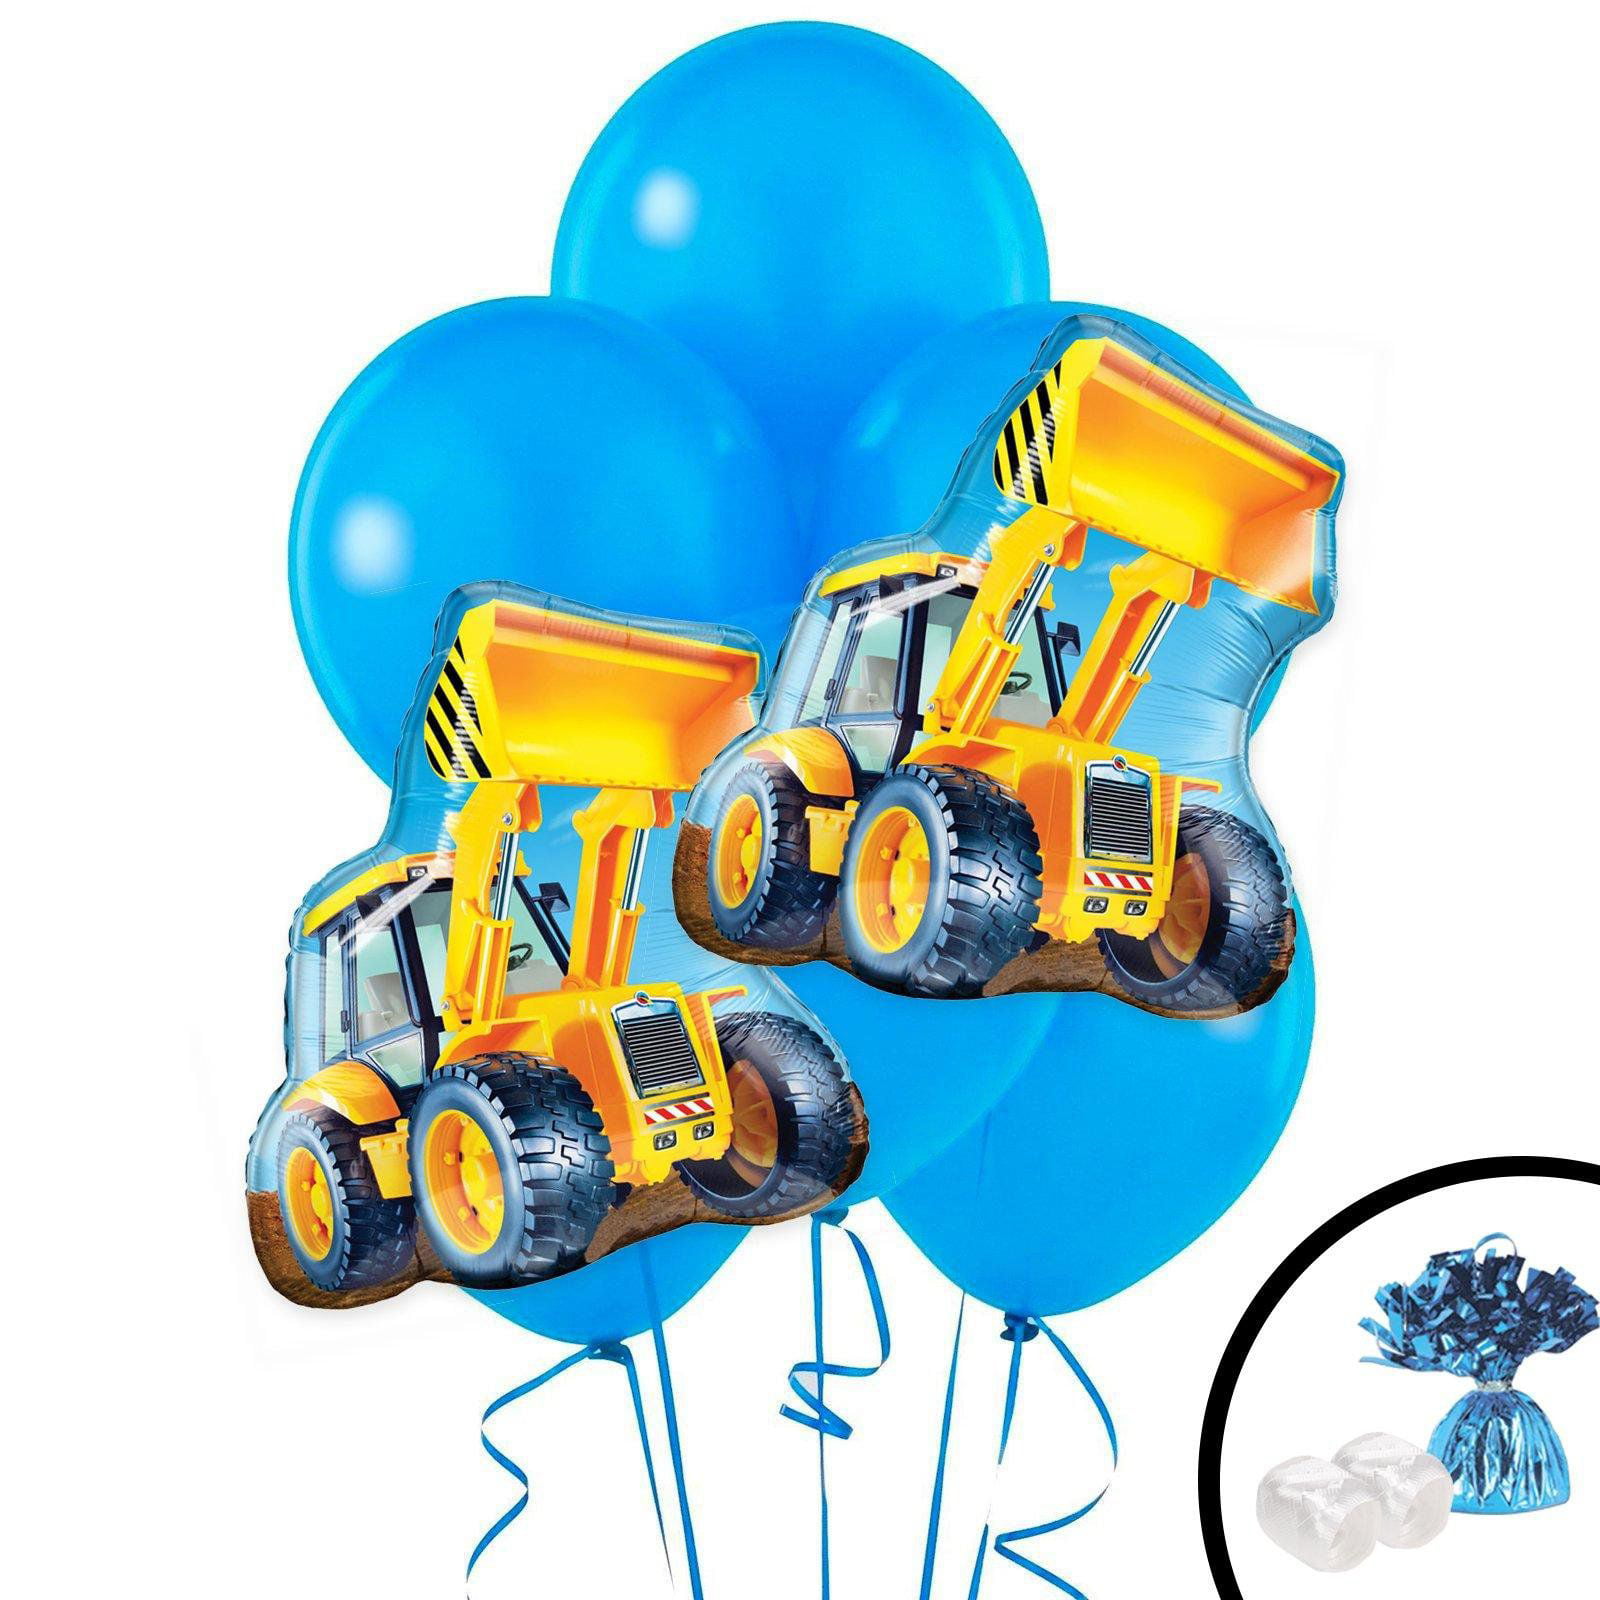 Construction Bull Dozer Party Balloons With #7